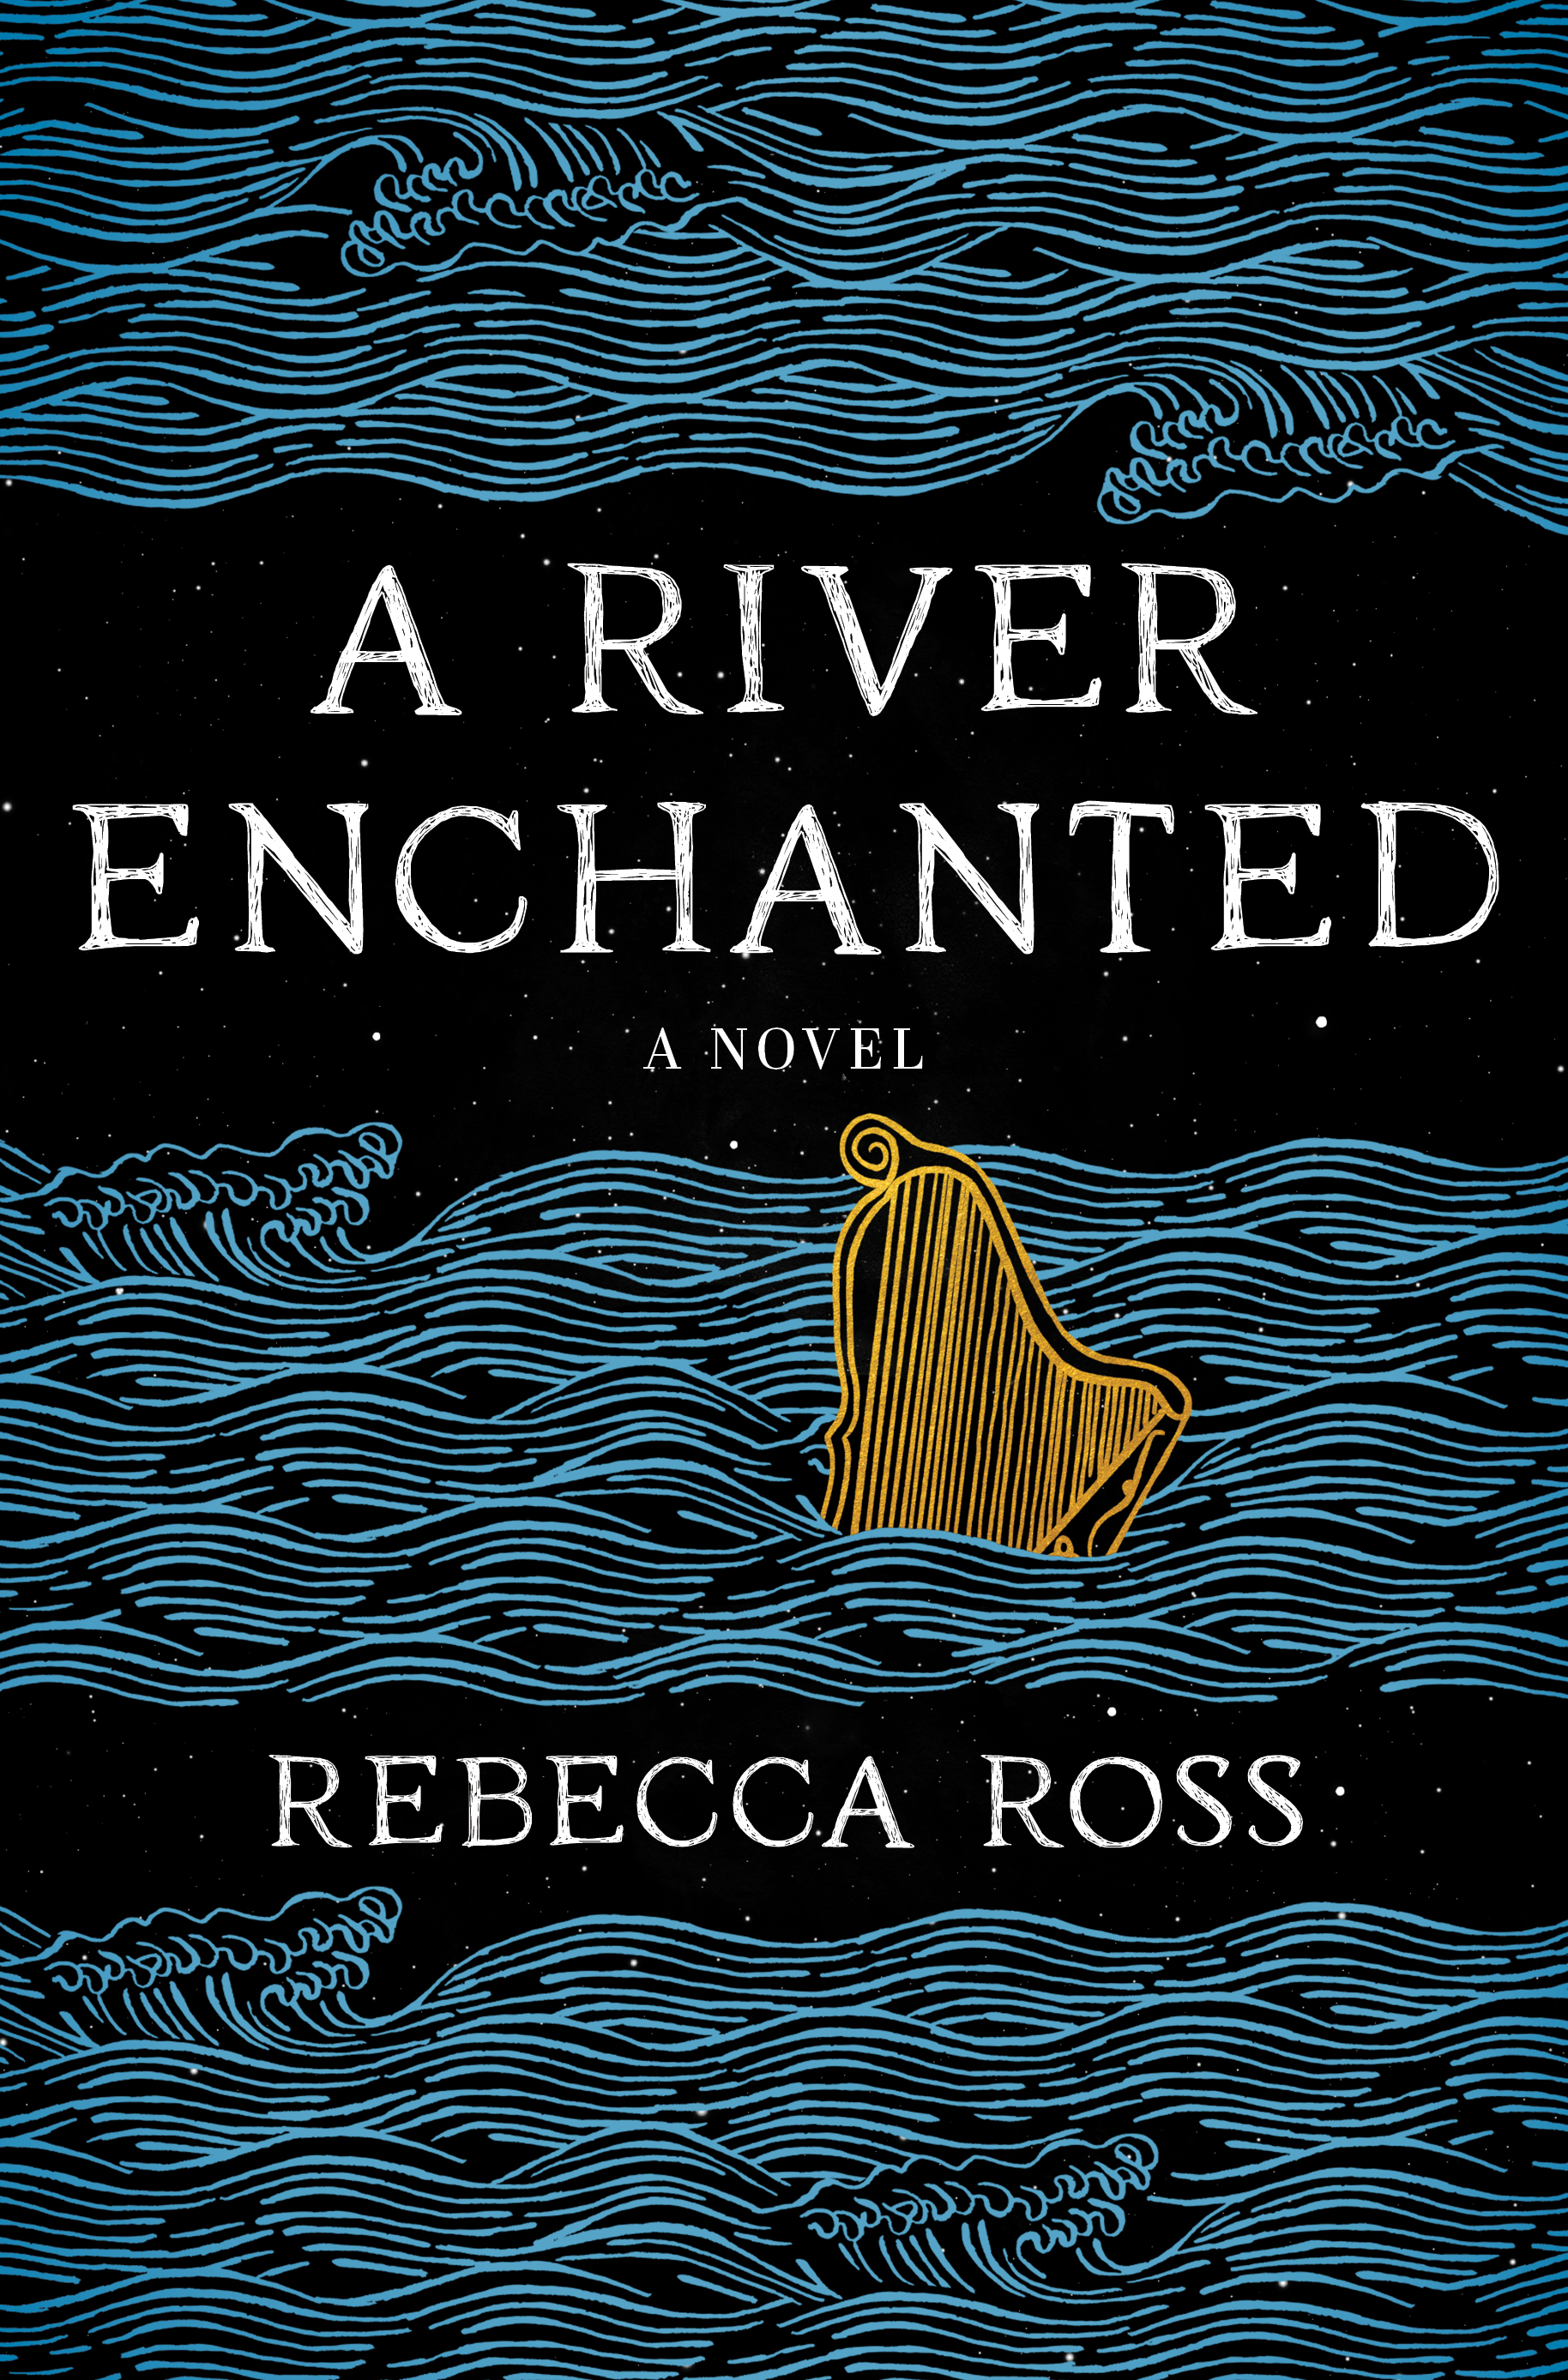 [EPUB] Elements of Cadence #1 A River Enchanted by Rebecca Ross